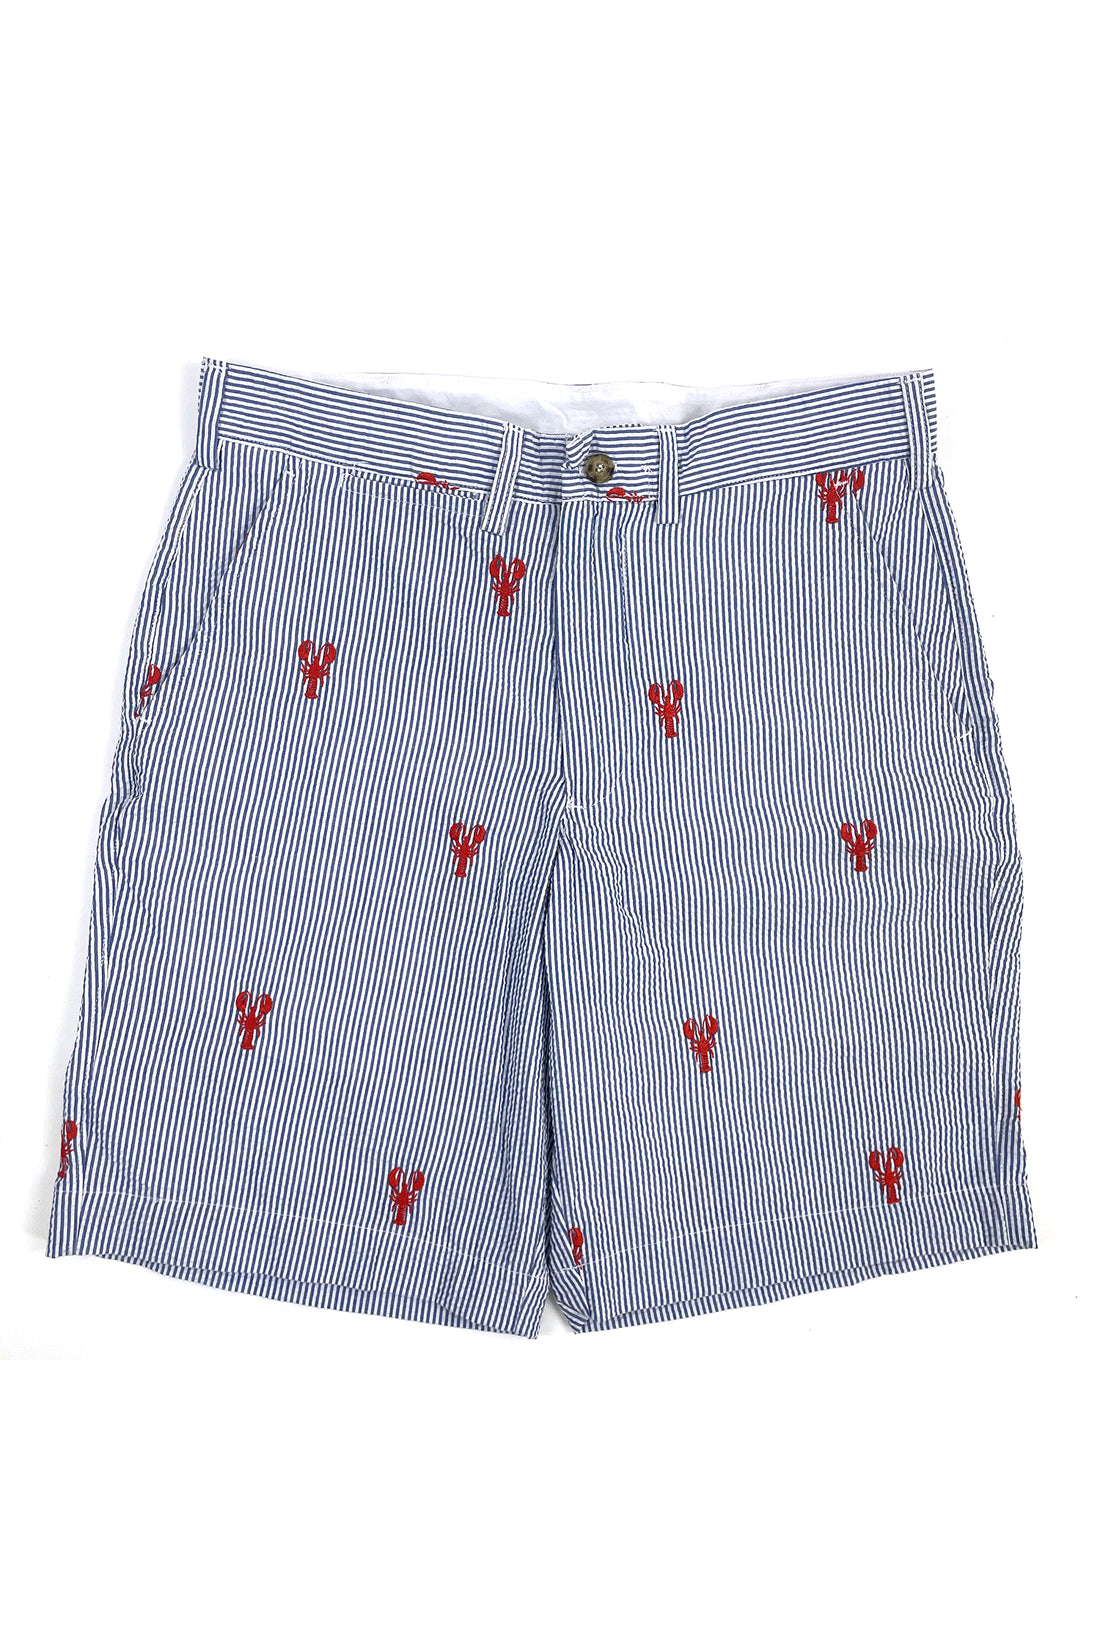 Blue Mens Seersucker Shorts with Red Embroidered Lobsters – Piping Prints